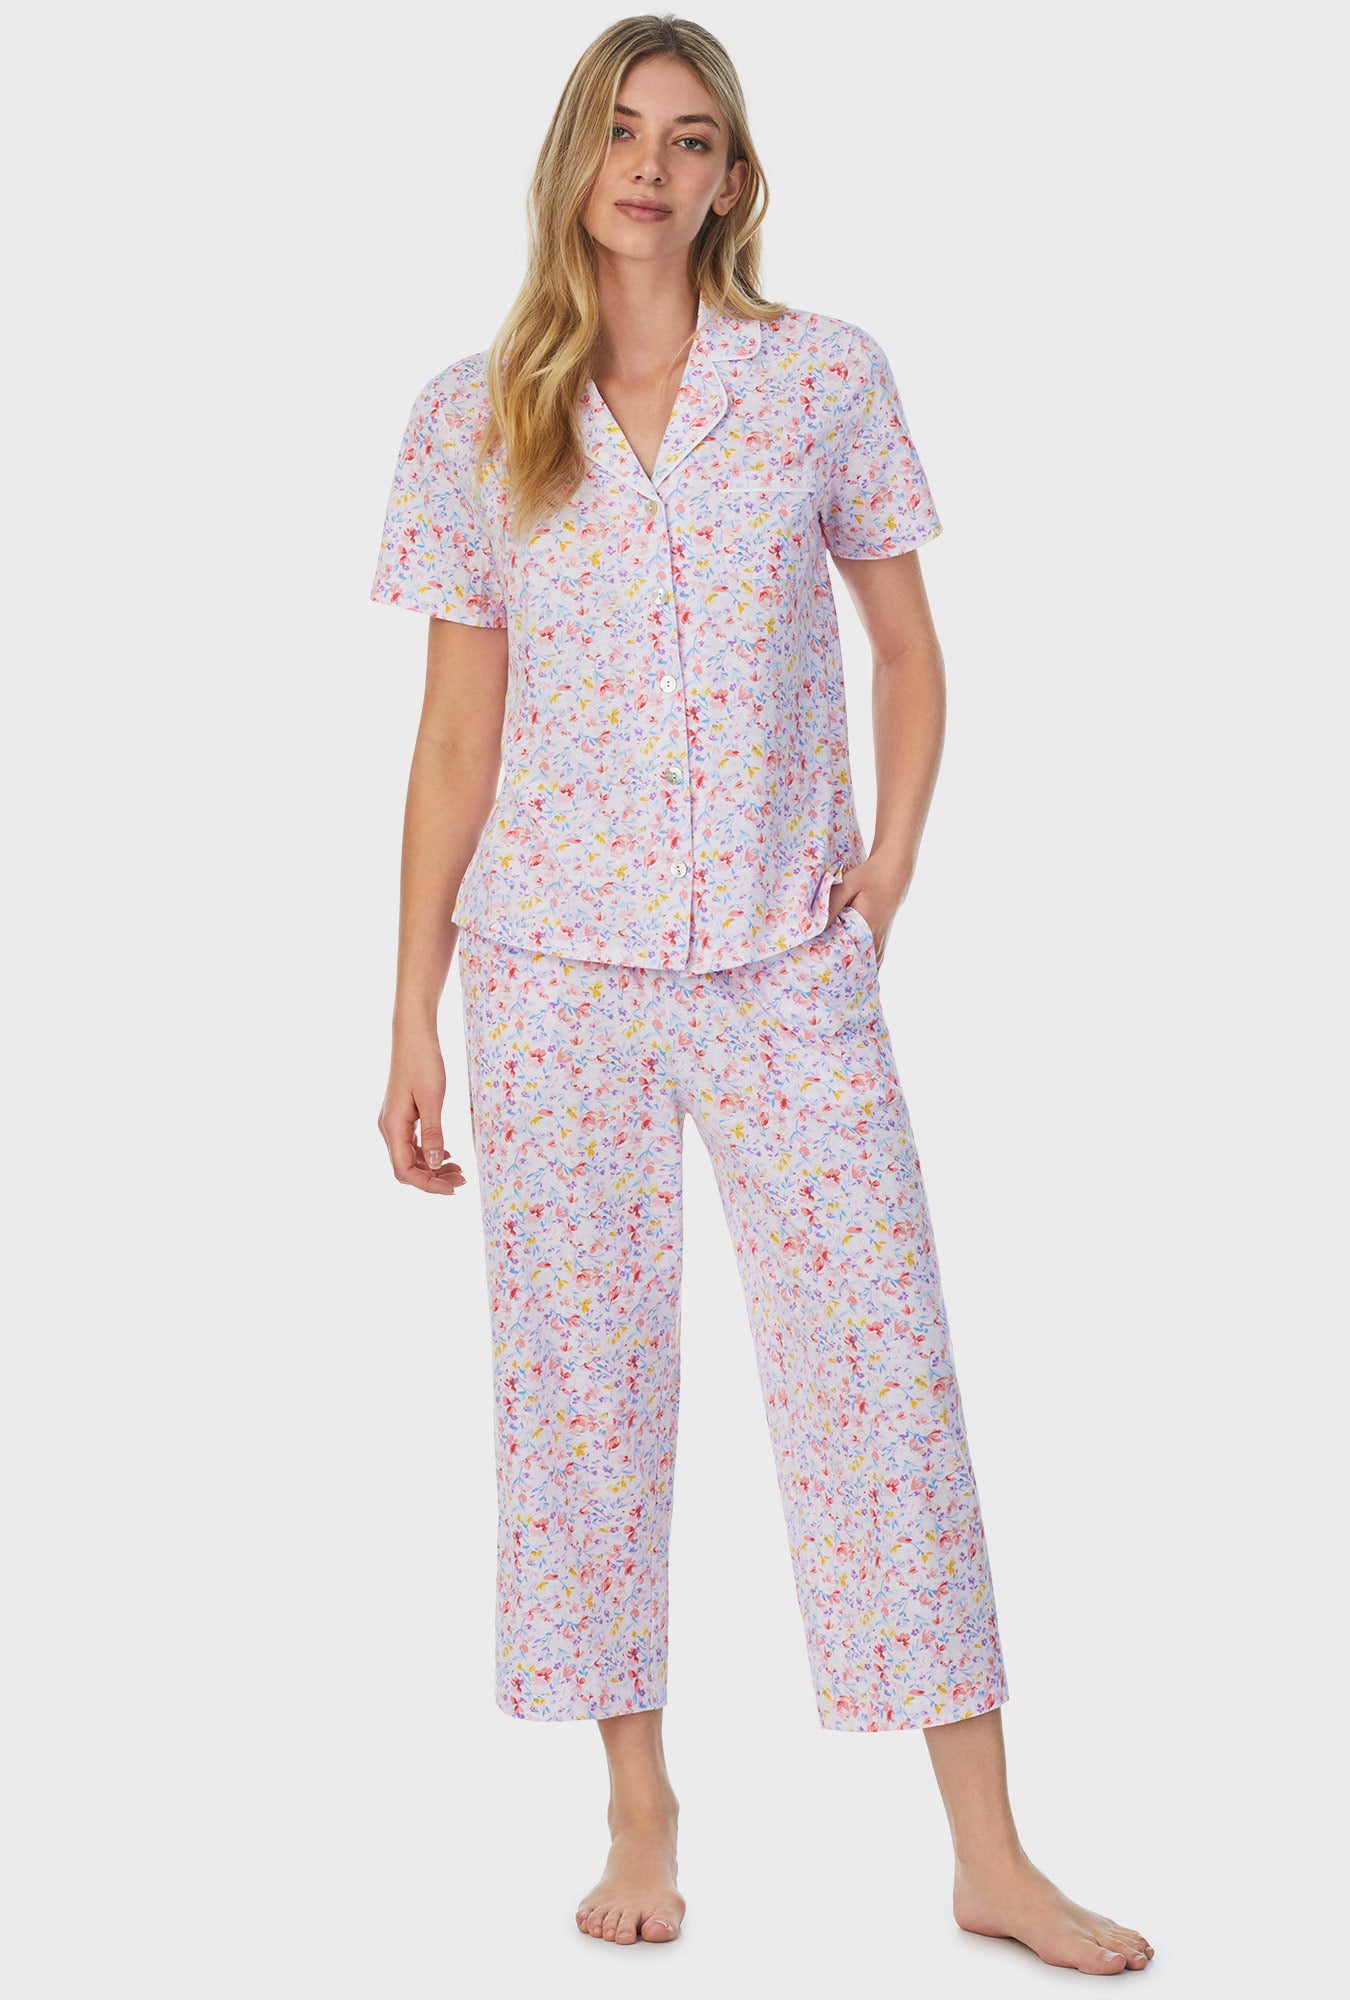 A lady wearing white short sleeve Capri Pajama Set with Garden Floral print